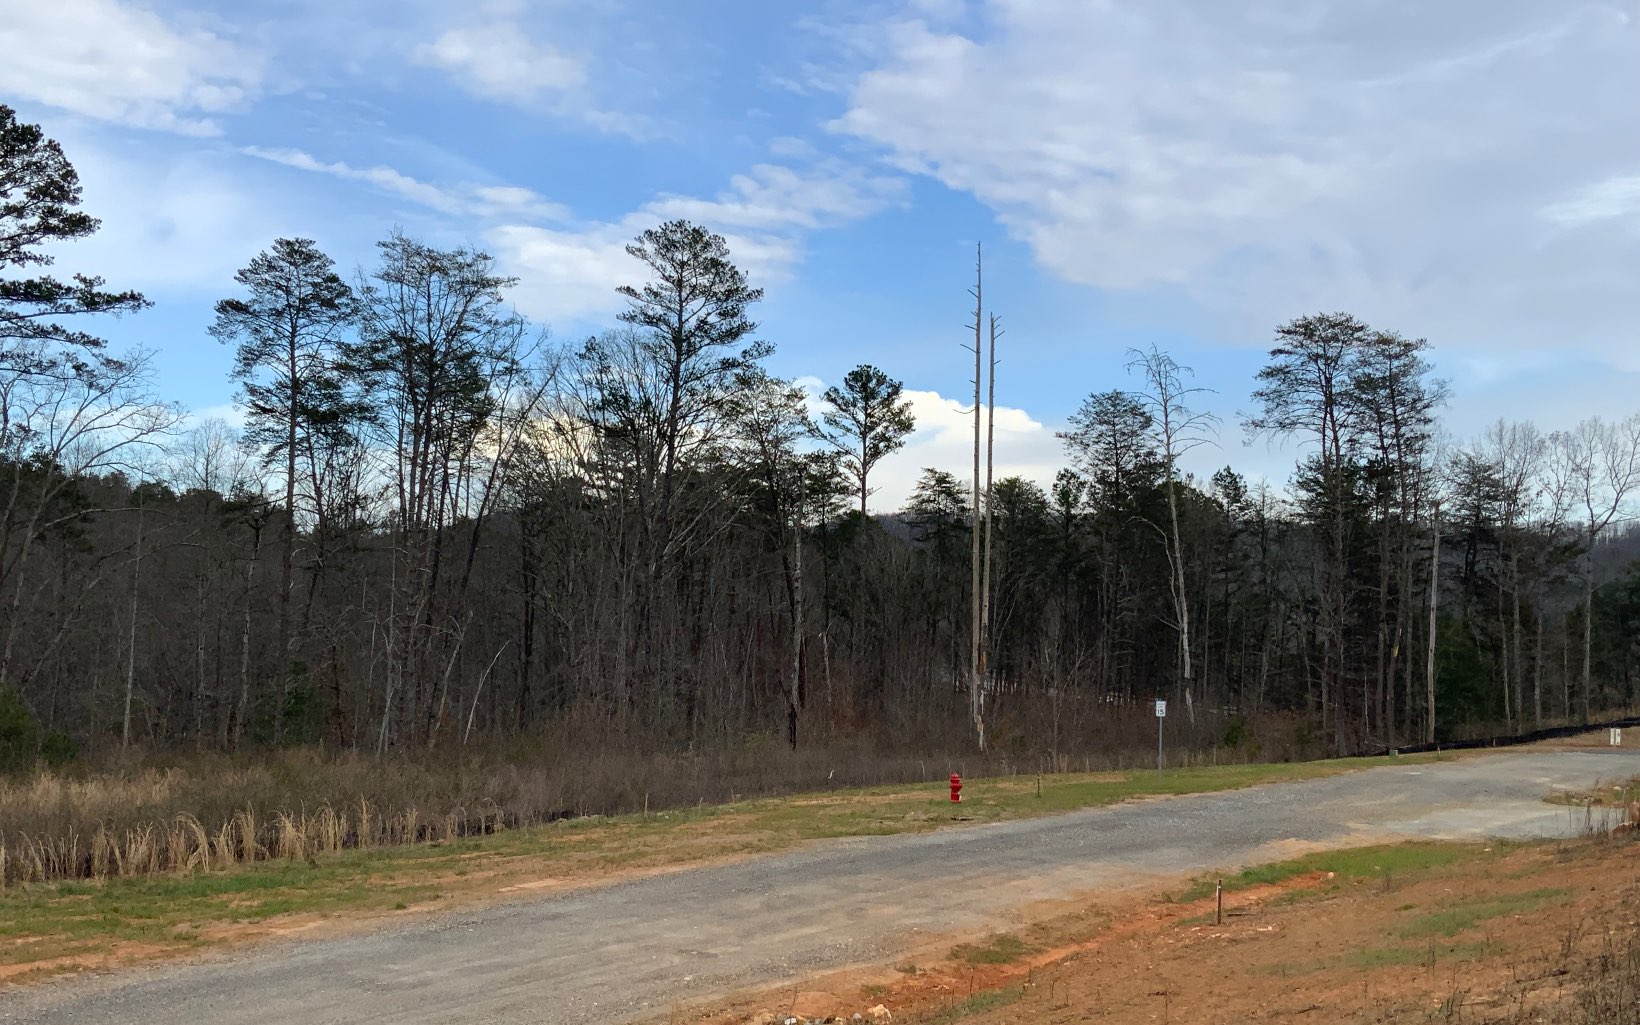 Perfect Location between Blue Ridge and Blairsville, this new community already has all the utilities including high speed internet. Some long range mountain views and some creek frontage lots are available. Come pick your lot to build that home in the Mountains you have been waiting for!